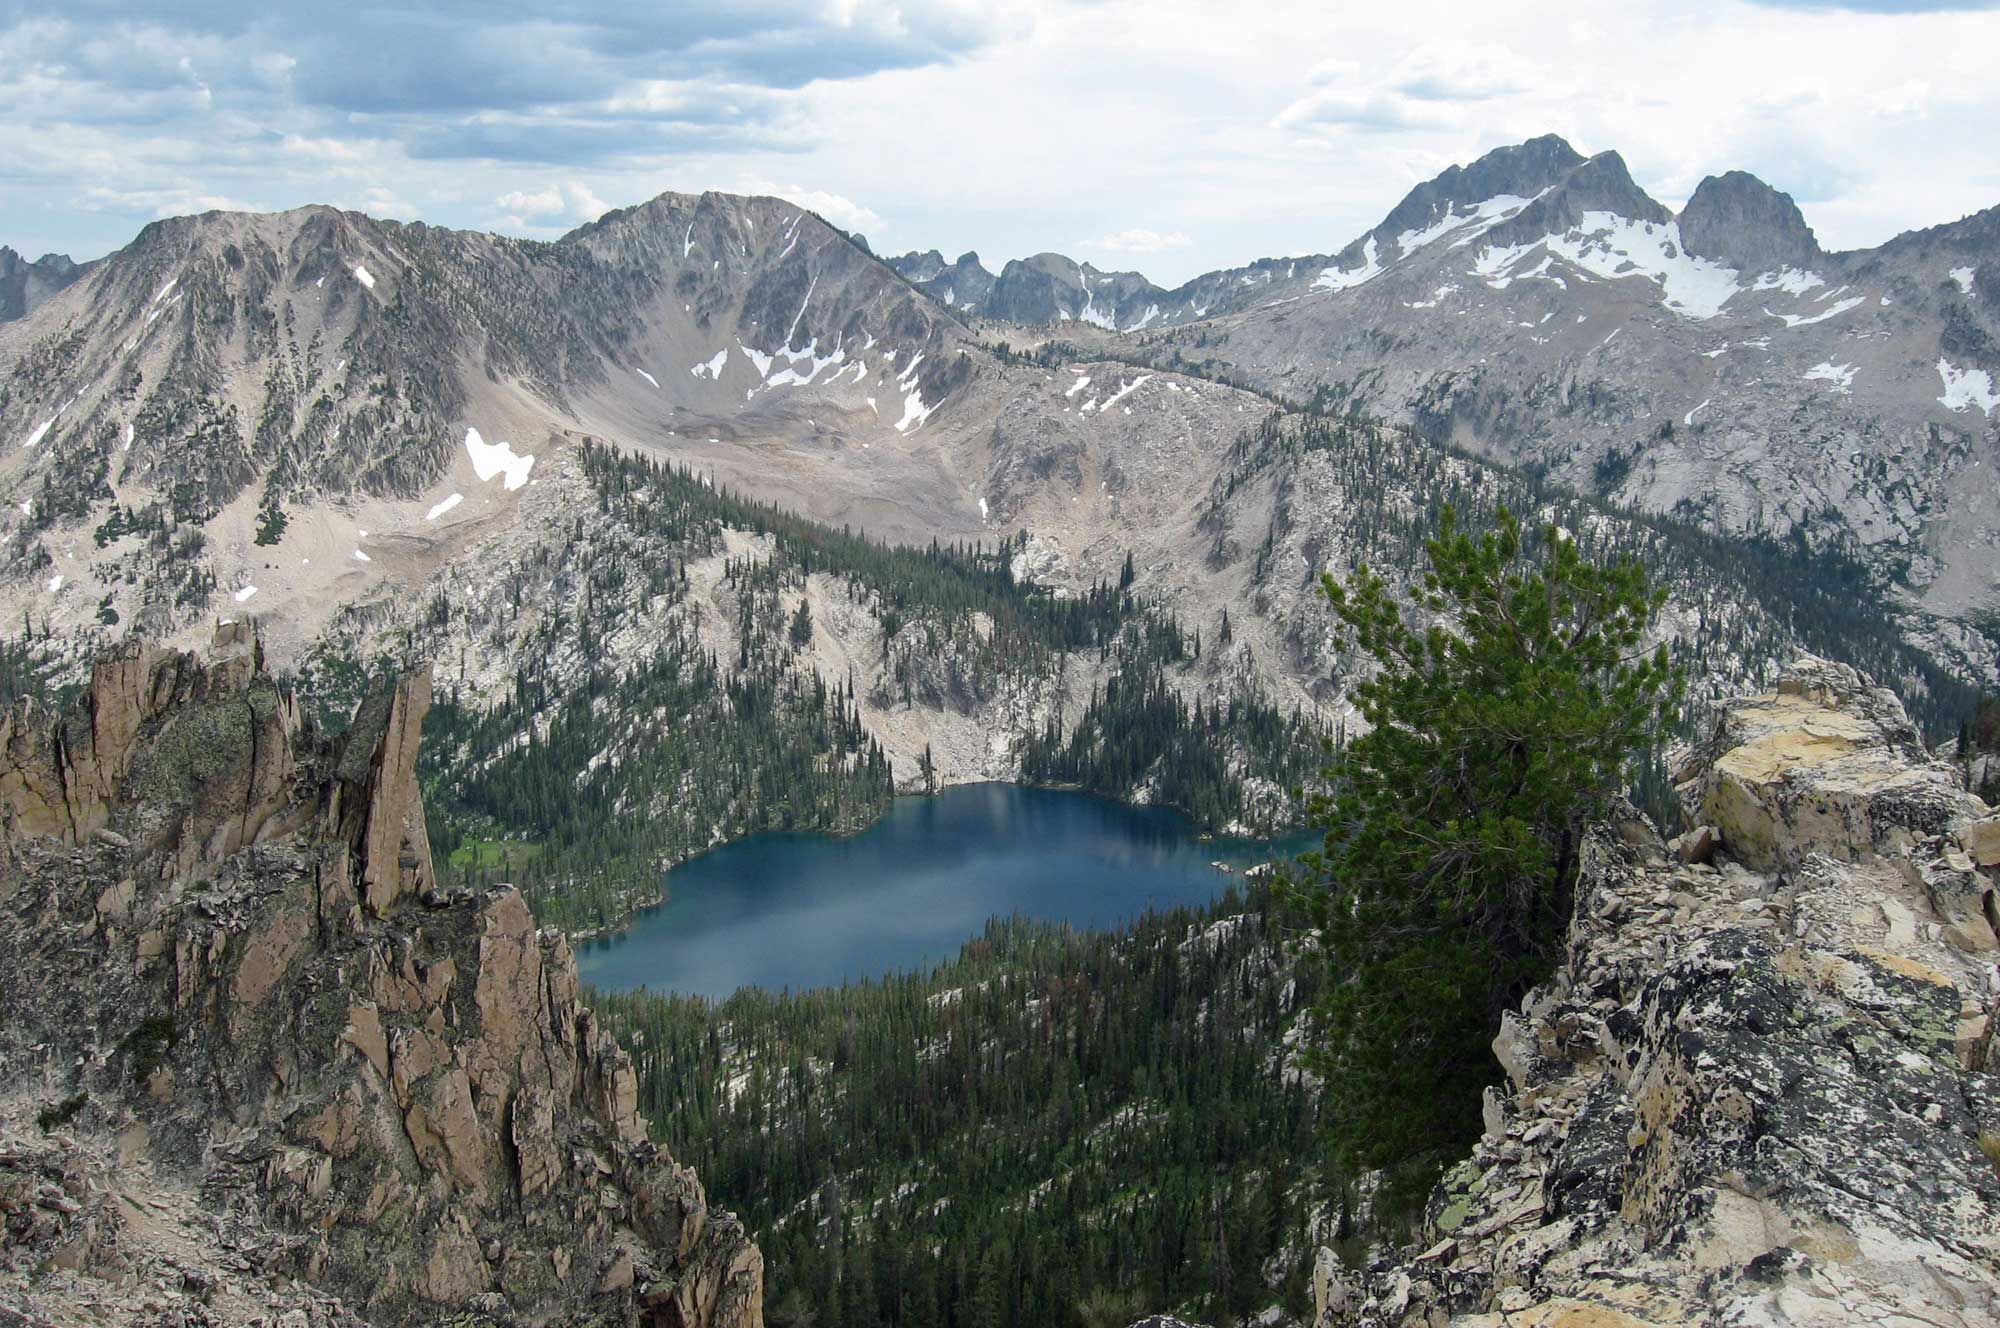 Photograph of Toxaway Lake surrounded by mountains made up of granite from the Idaho Batholith. The photo shows a blue lake surrounded by jagged gray mountain peaks. The lower slopes of the mountains have conifers on them; the upper slopes have patches of snow.